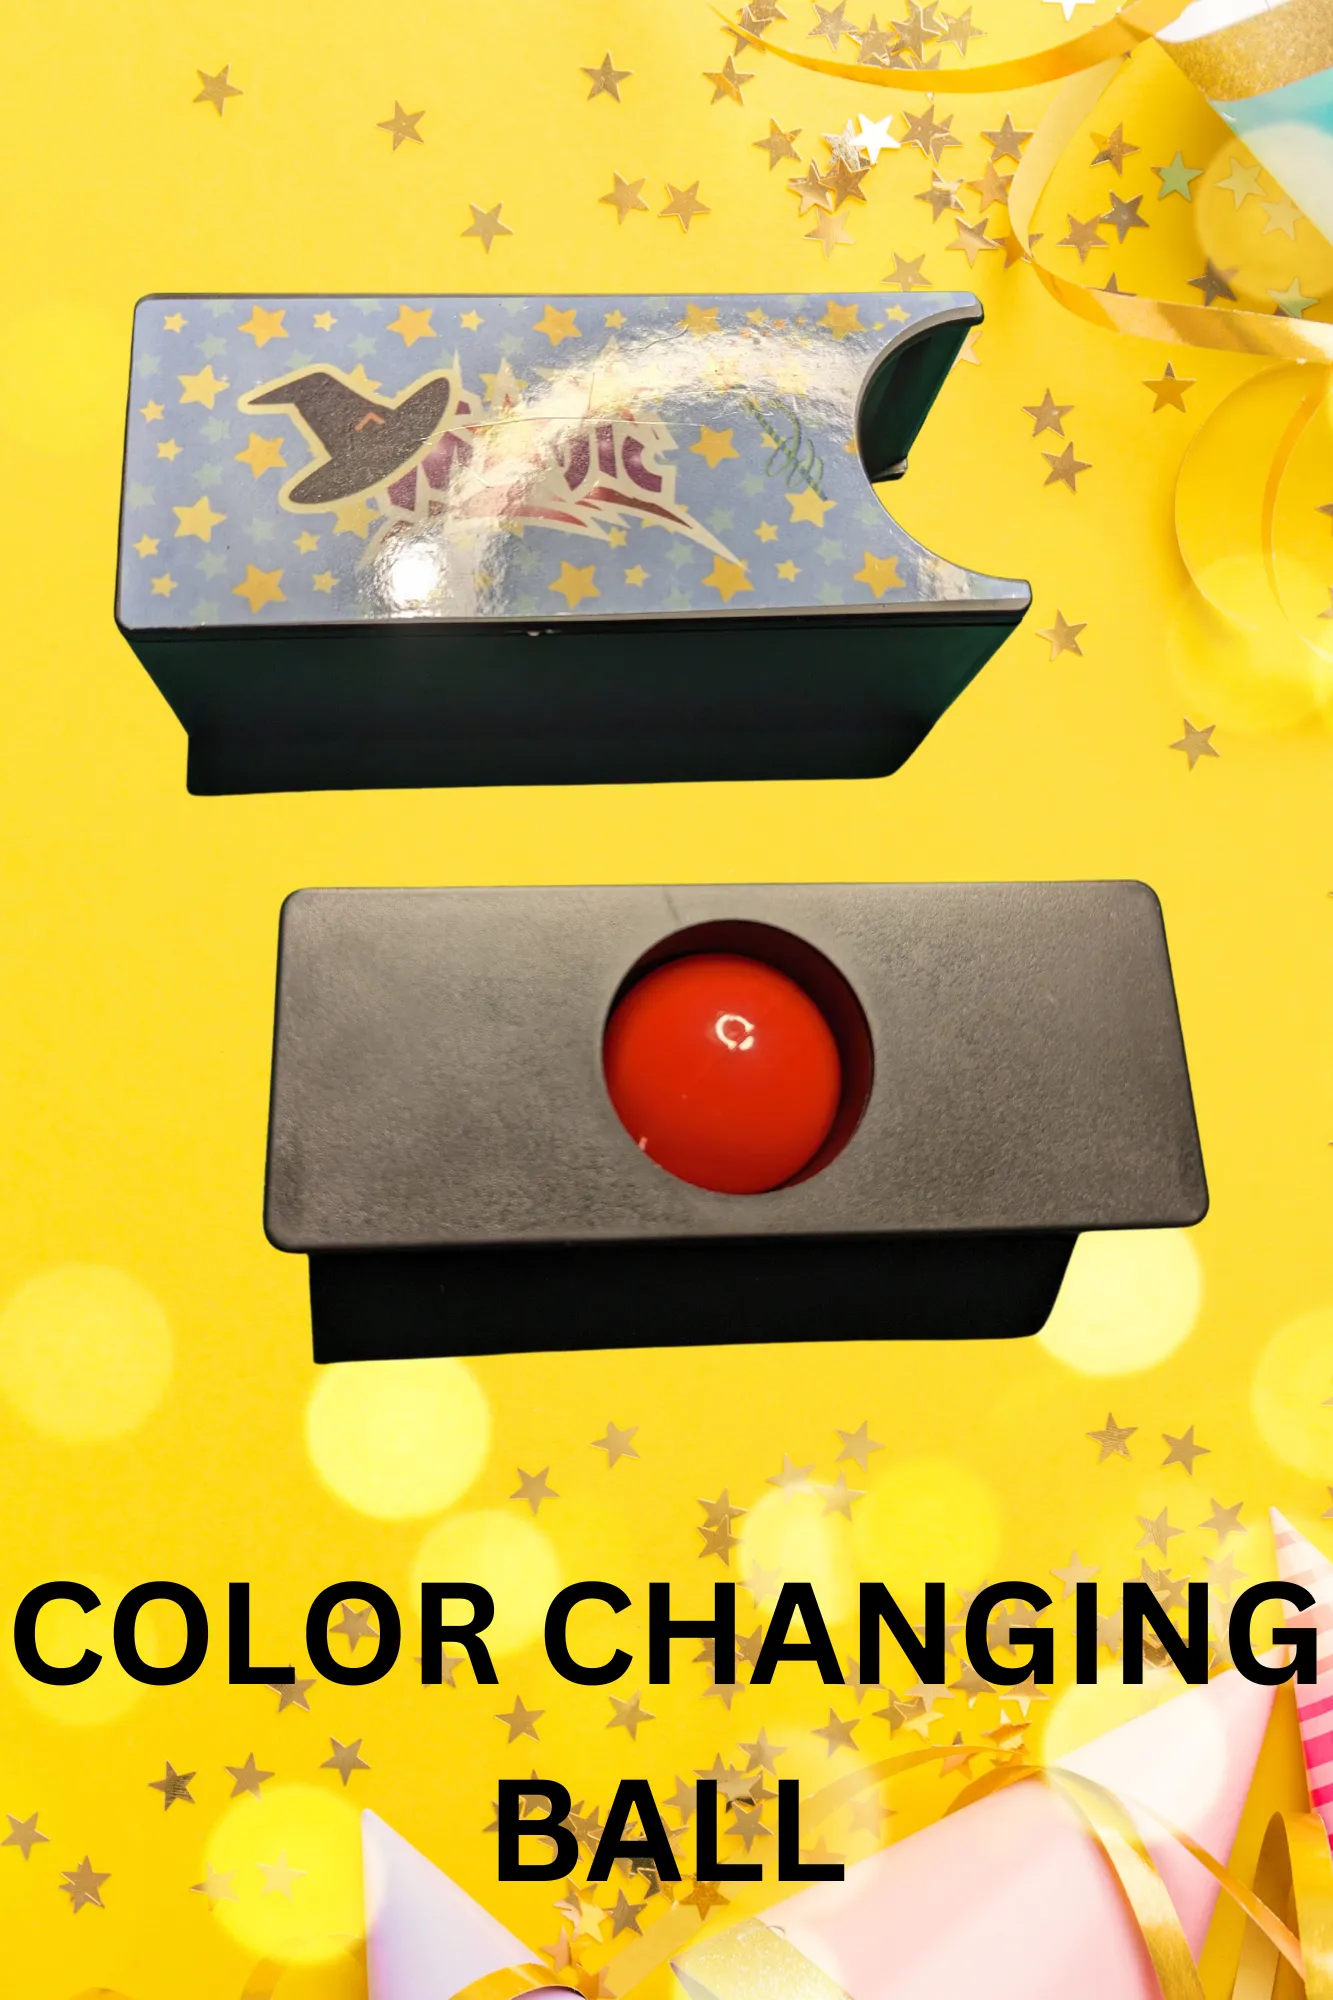 COLOR CHANGING BALL